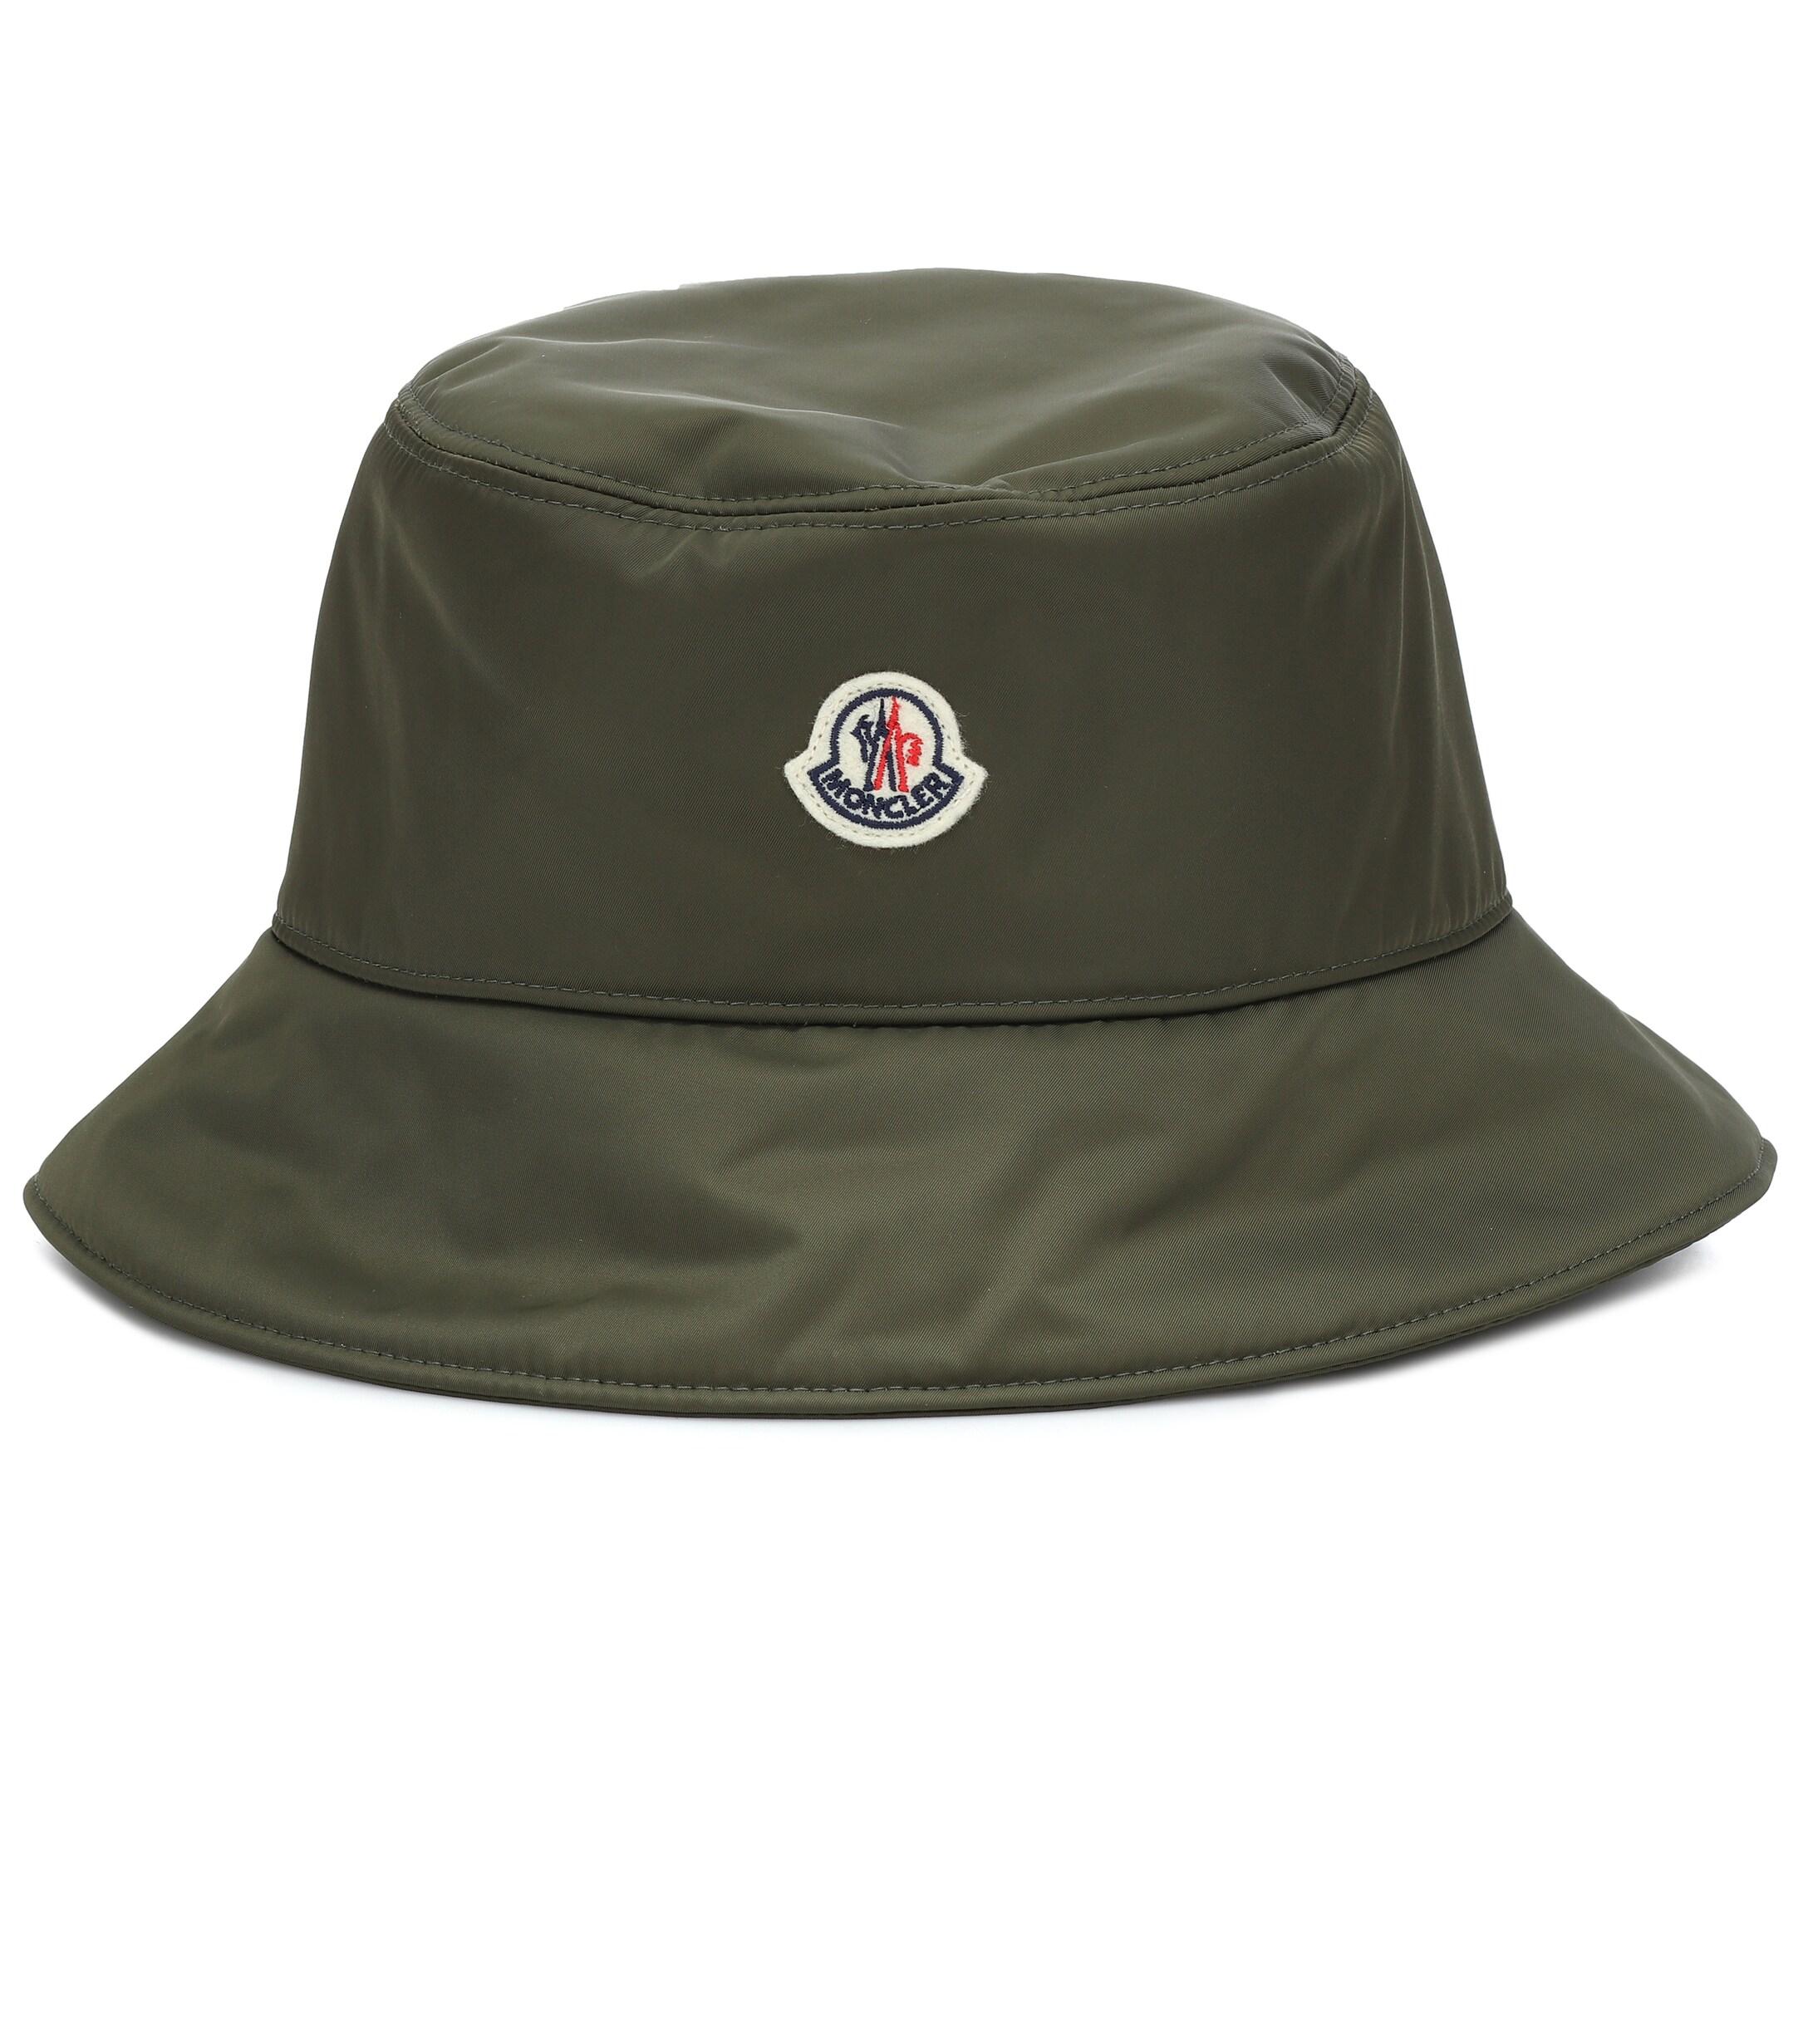 Moncler Bucket Hat in Army Green (Green) - Lyst